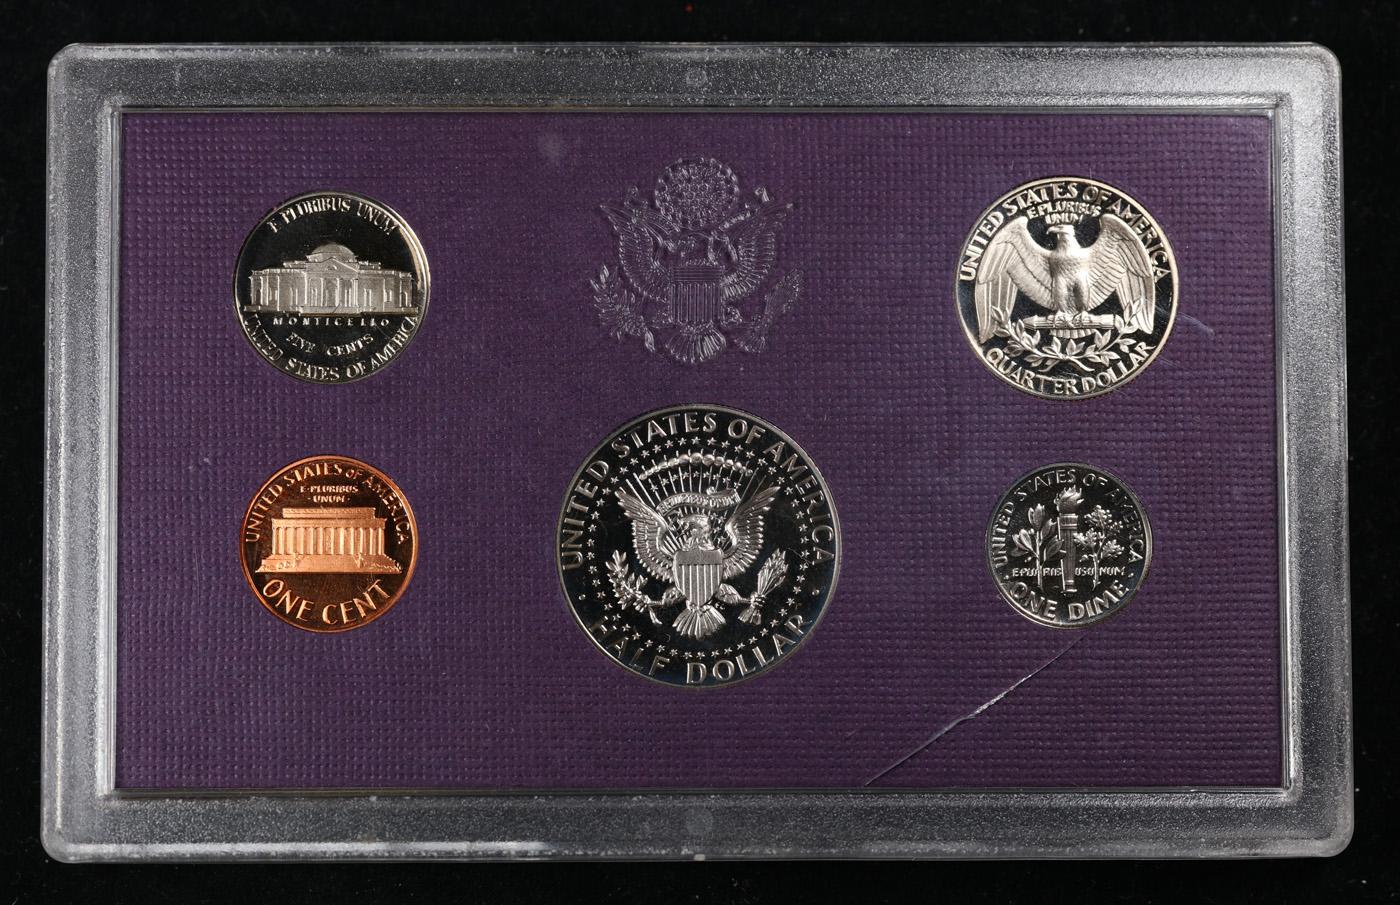 1986 United States Mint Proof Set 5 coins - No Outer Box